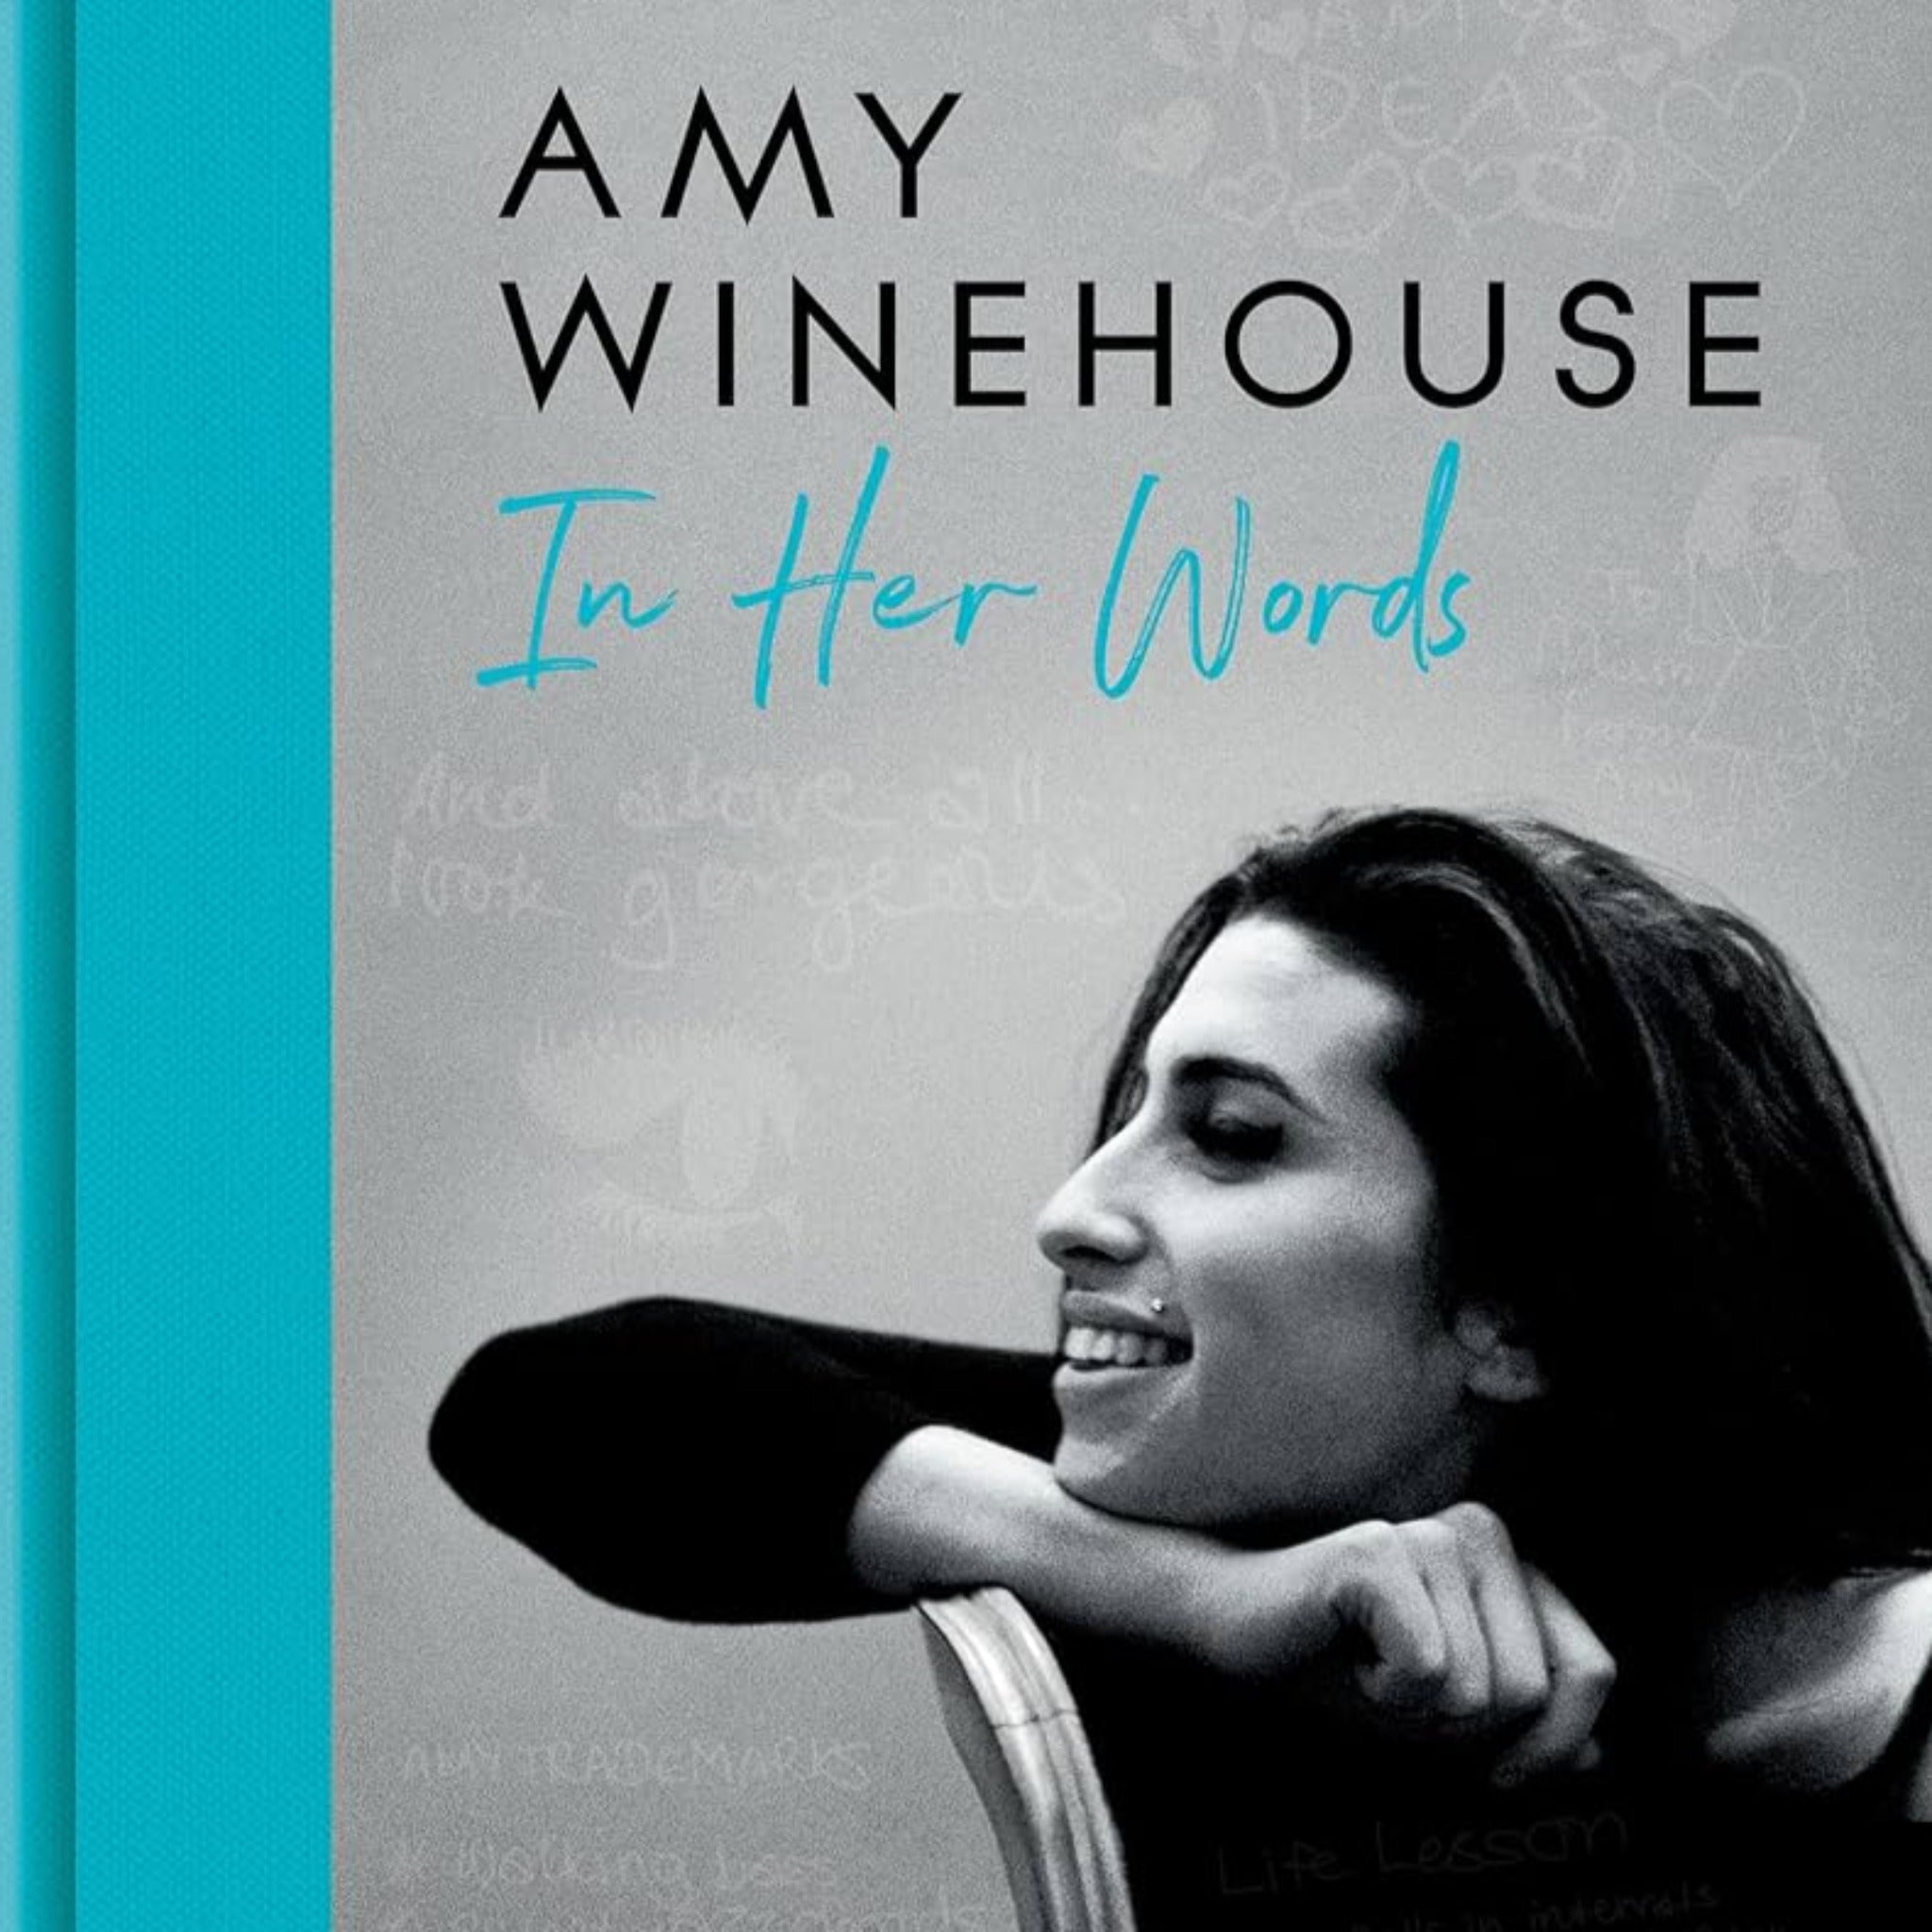 AMY WINEHOUSE: IN HER WORDS